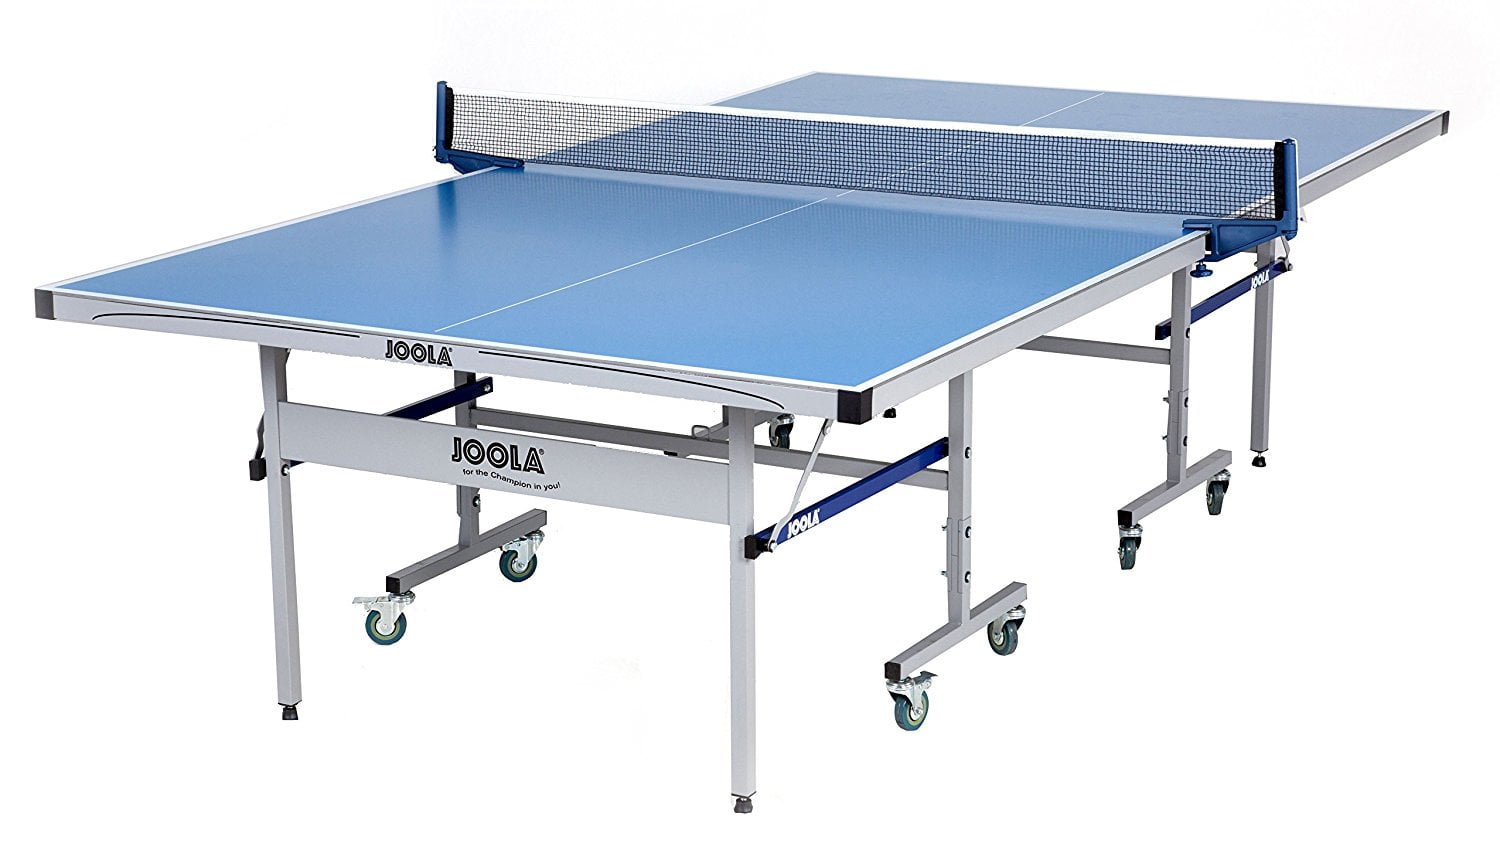 Foldable Outdoor Table Tennis Table Ping Pong Table Aluminum Composite Top Tournament Quality Full Size Quick Assembly Playback Mode All Weather Resistant Professional Accessory Paddles Net Set Balls 